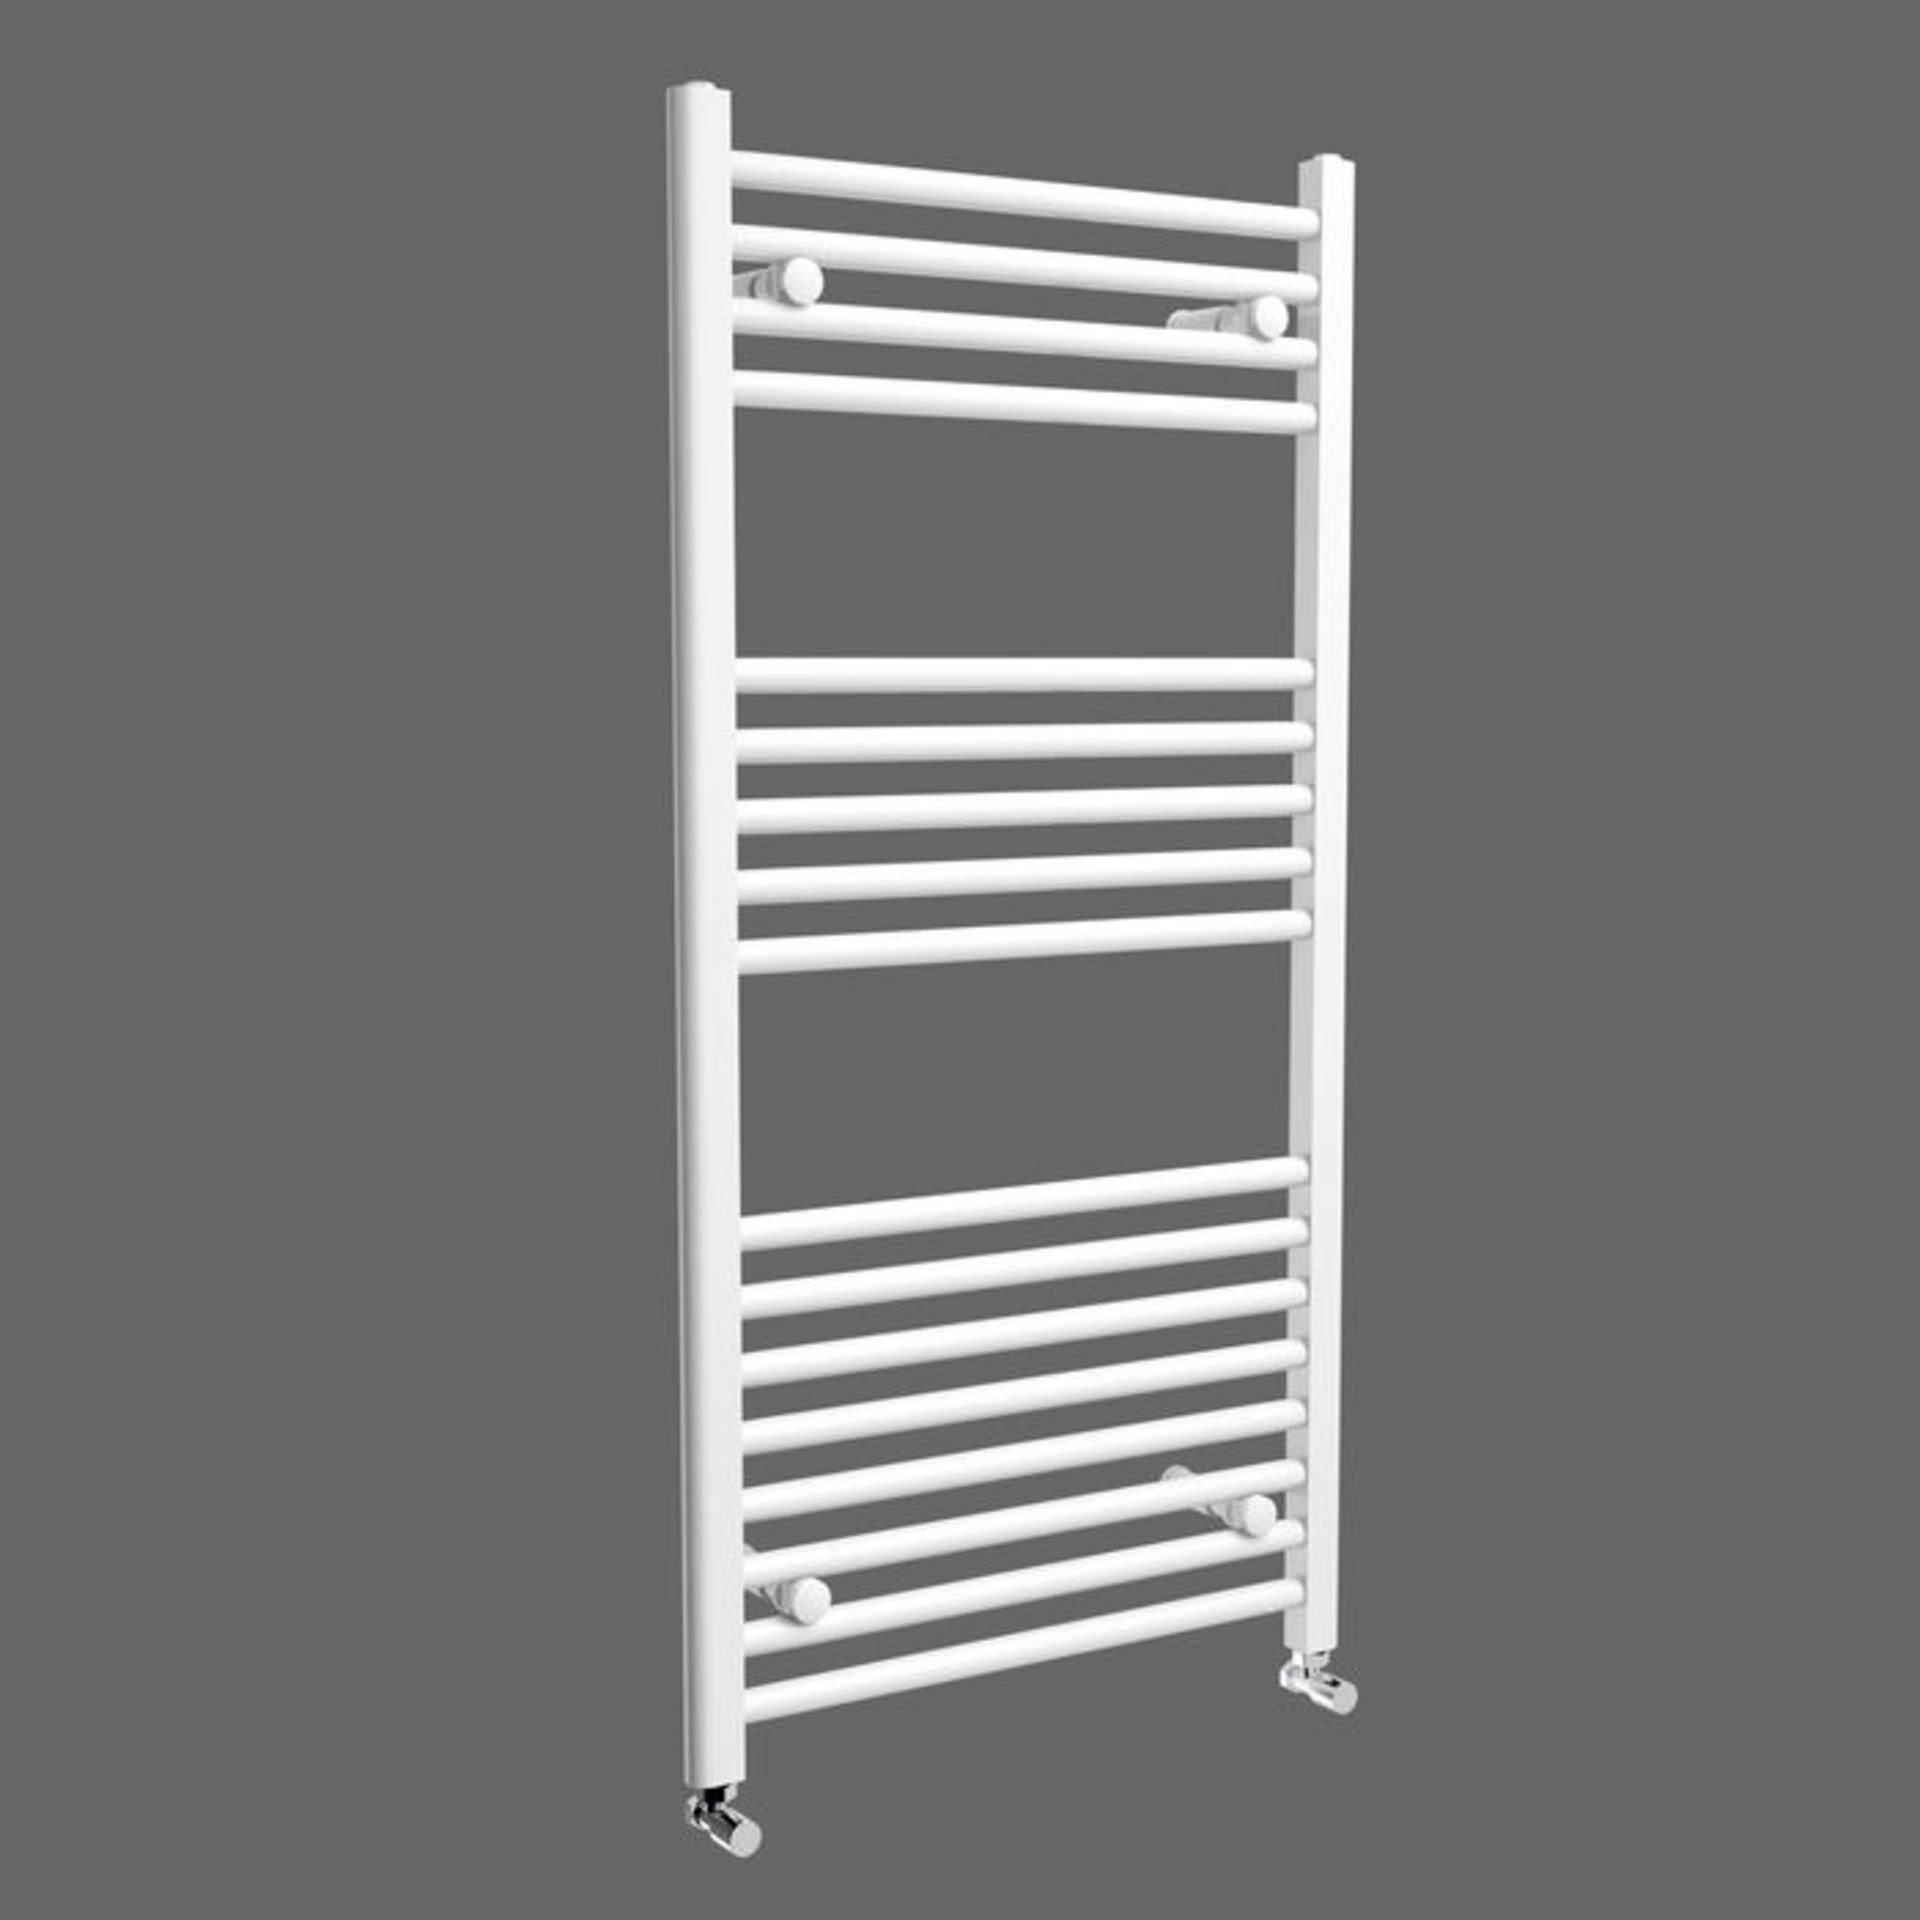 (L75) 1200x600mm White Straight Rail Ladder Towel Radiator. Low carbon steel, high quality white - Image 3 of 4